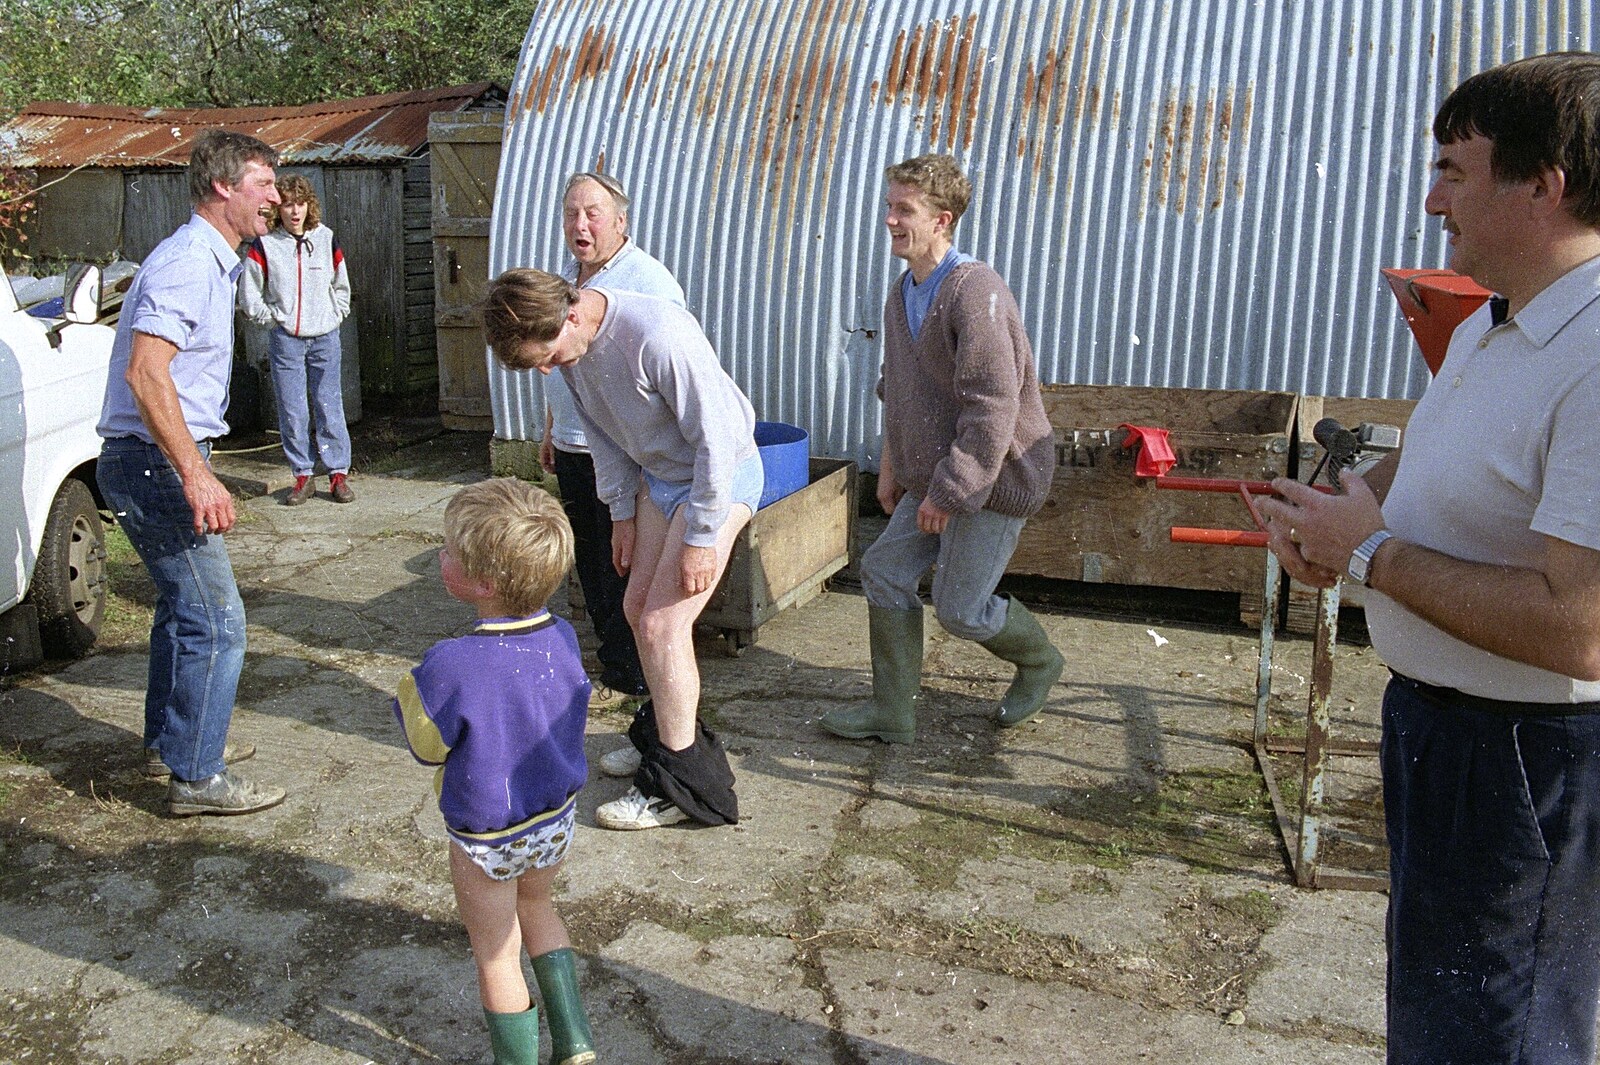 Everyone has their trousers off from Cider Making, Stuston, Suffolk - 14th October 1991